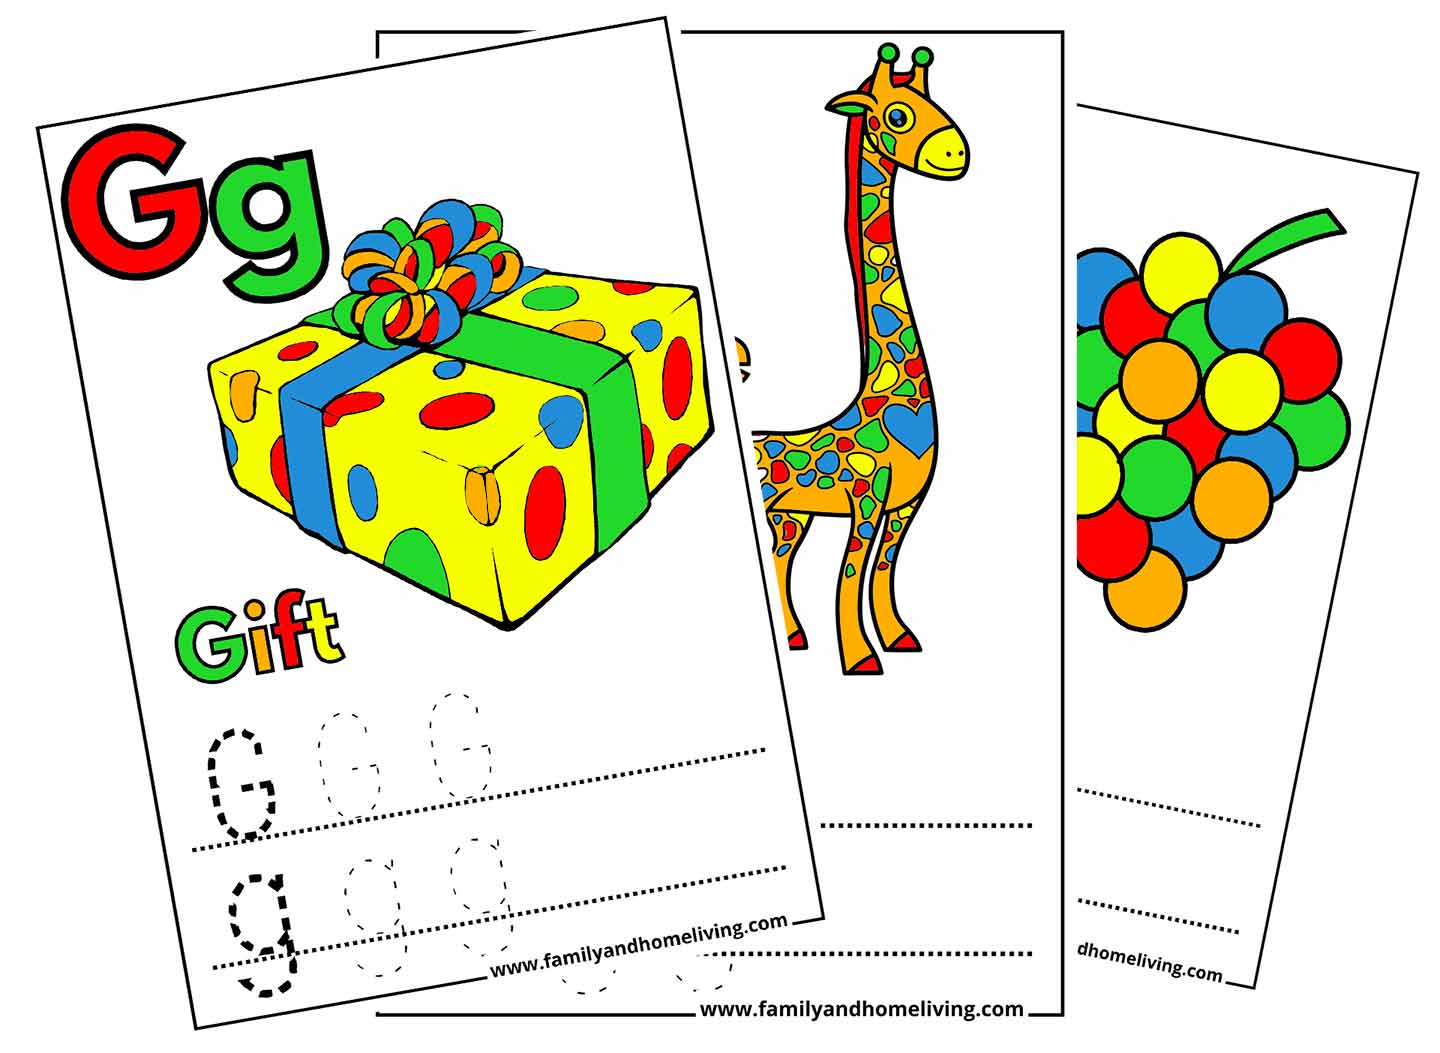 Free Printable Letter G Coloring Pages & Worksheets [12 Page PDF Bundle]